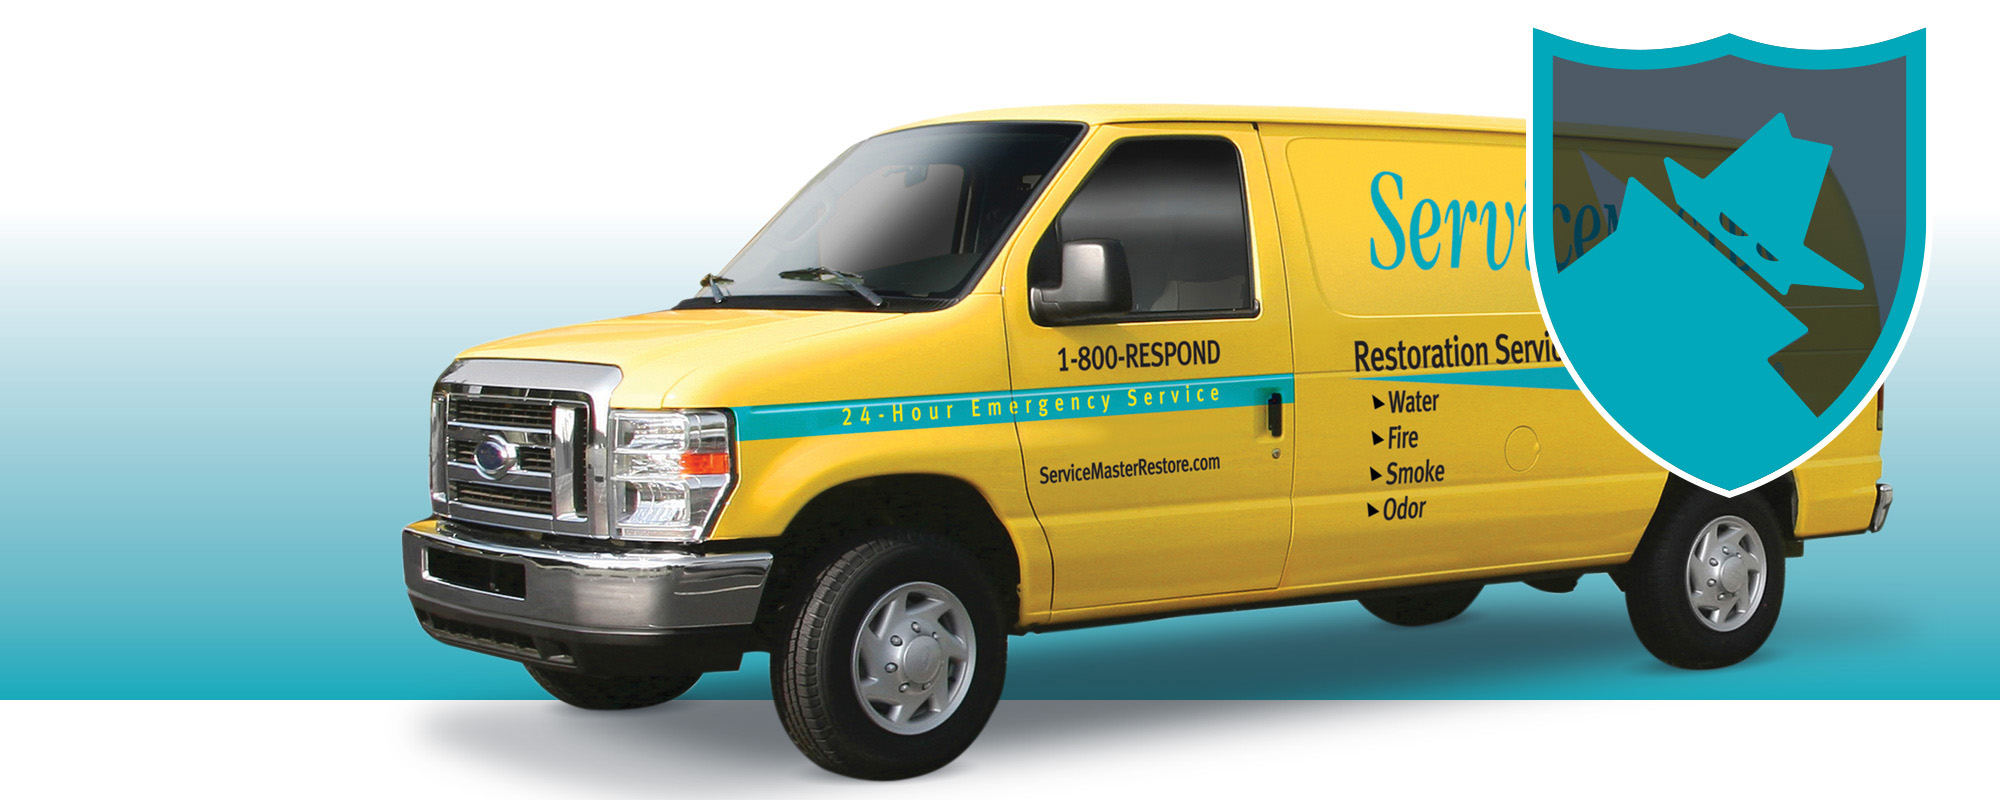 Yellow ServiceMaster van on a white and blue background with the ServiceMaster logo above it